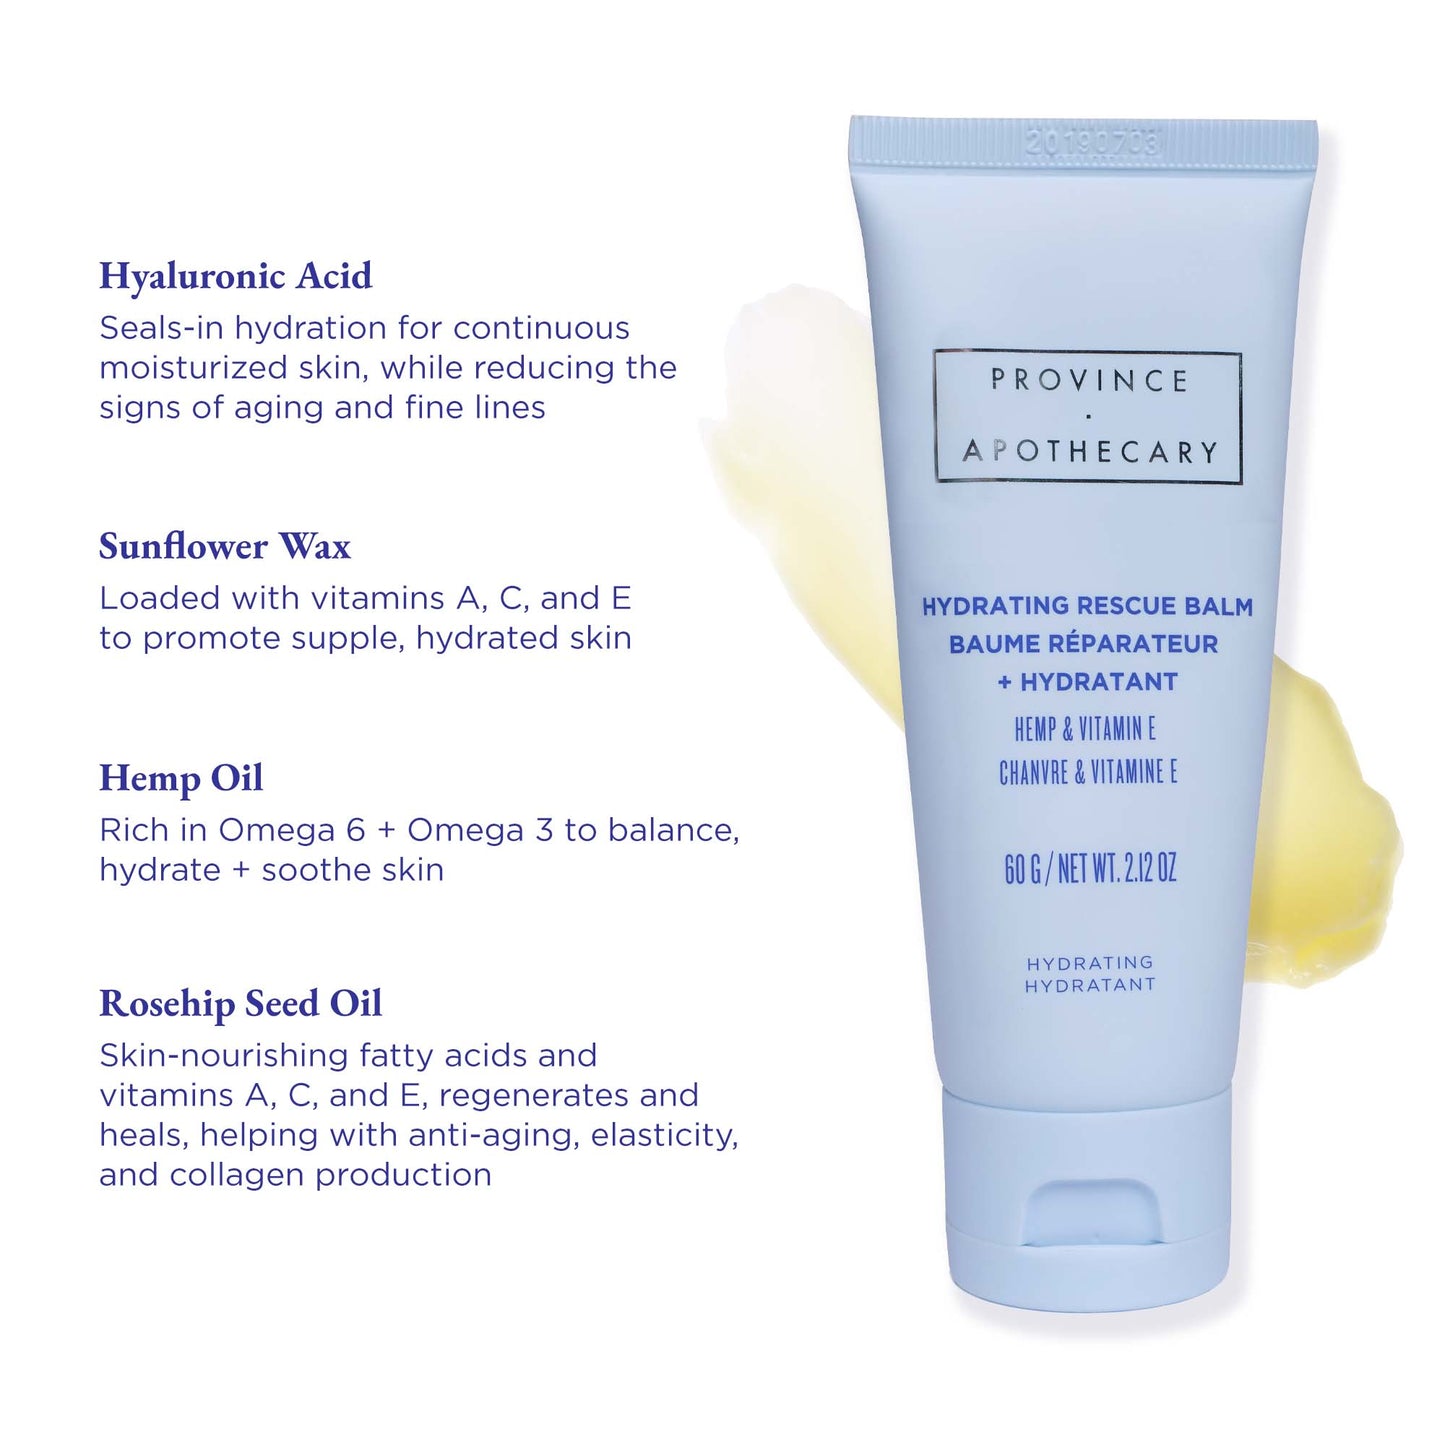 Province Apothecary Hydrating Rescue Balm 60ml